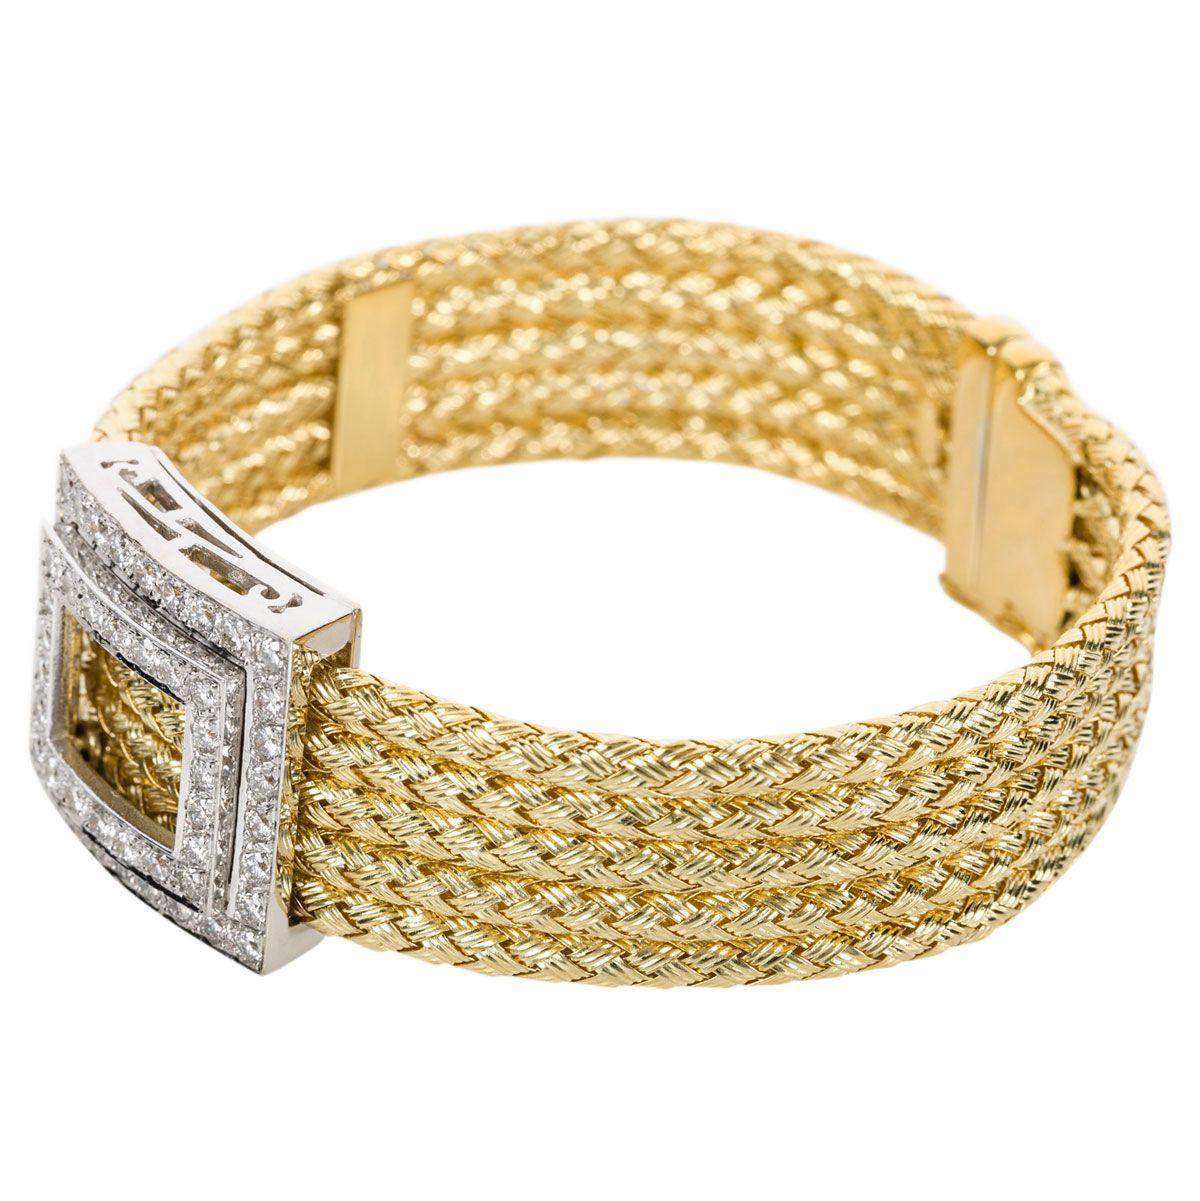 A finely made 18k yellow gold Italian multi-strand (5) plaited bracelet with an 18k white gold rectangular shaped centre piece containing 52 grain set diamonds. The diamonds weigh approximately 1.30cts in total and are G colour, VS clarity - modern